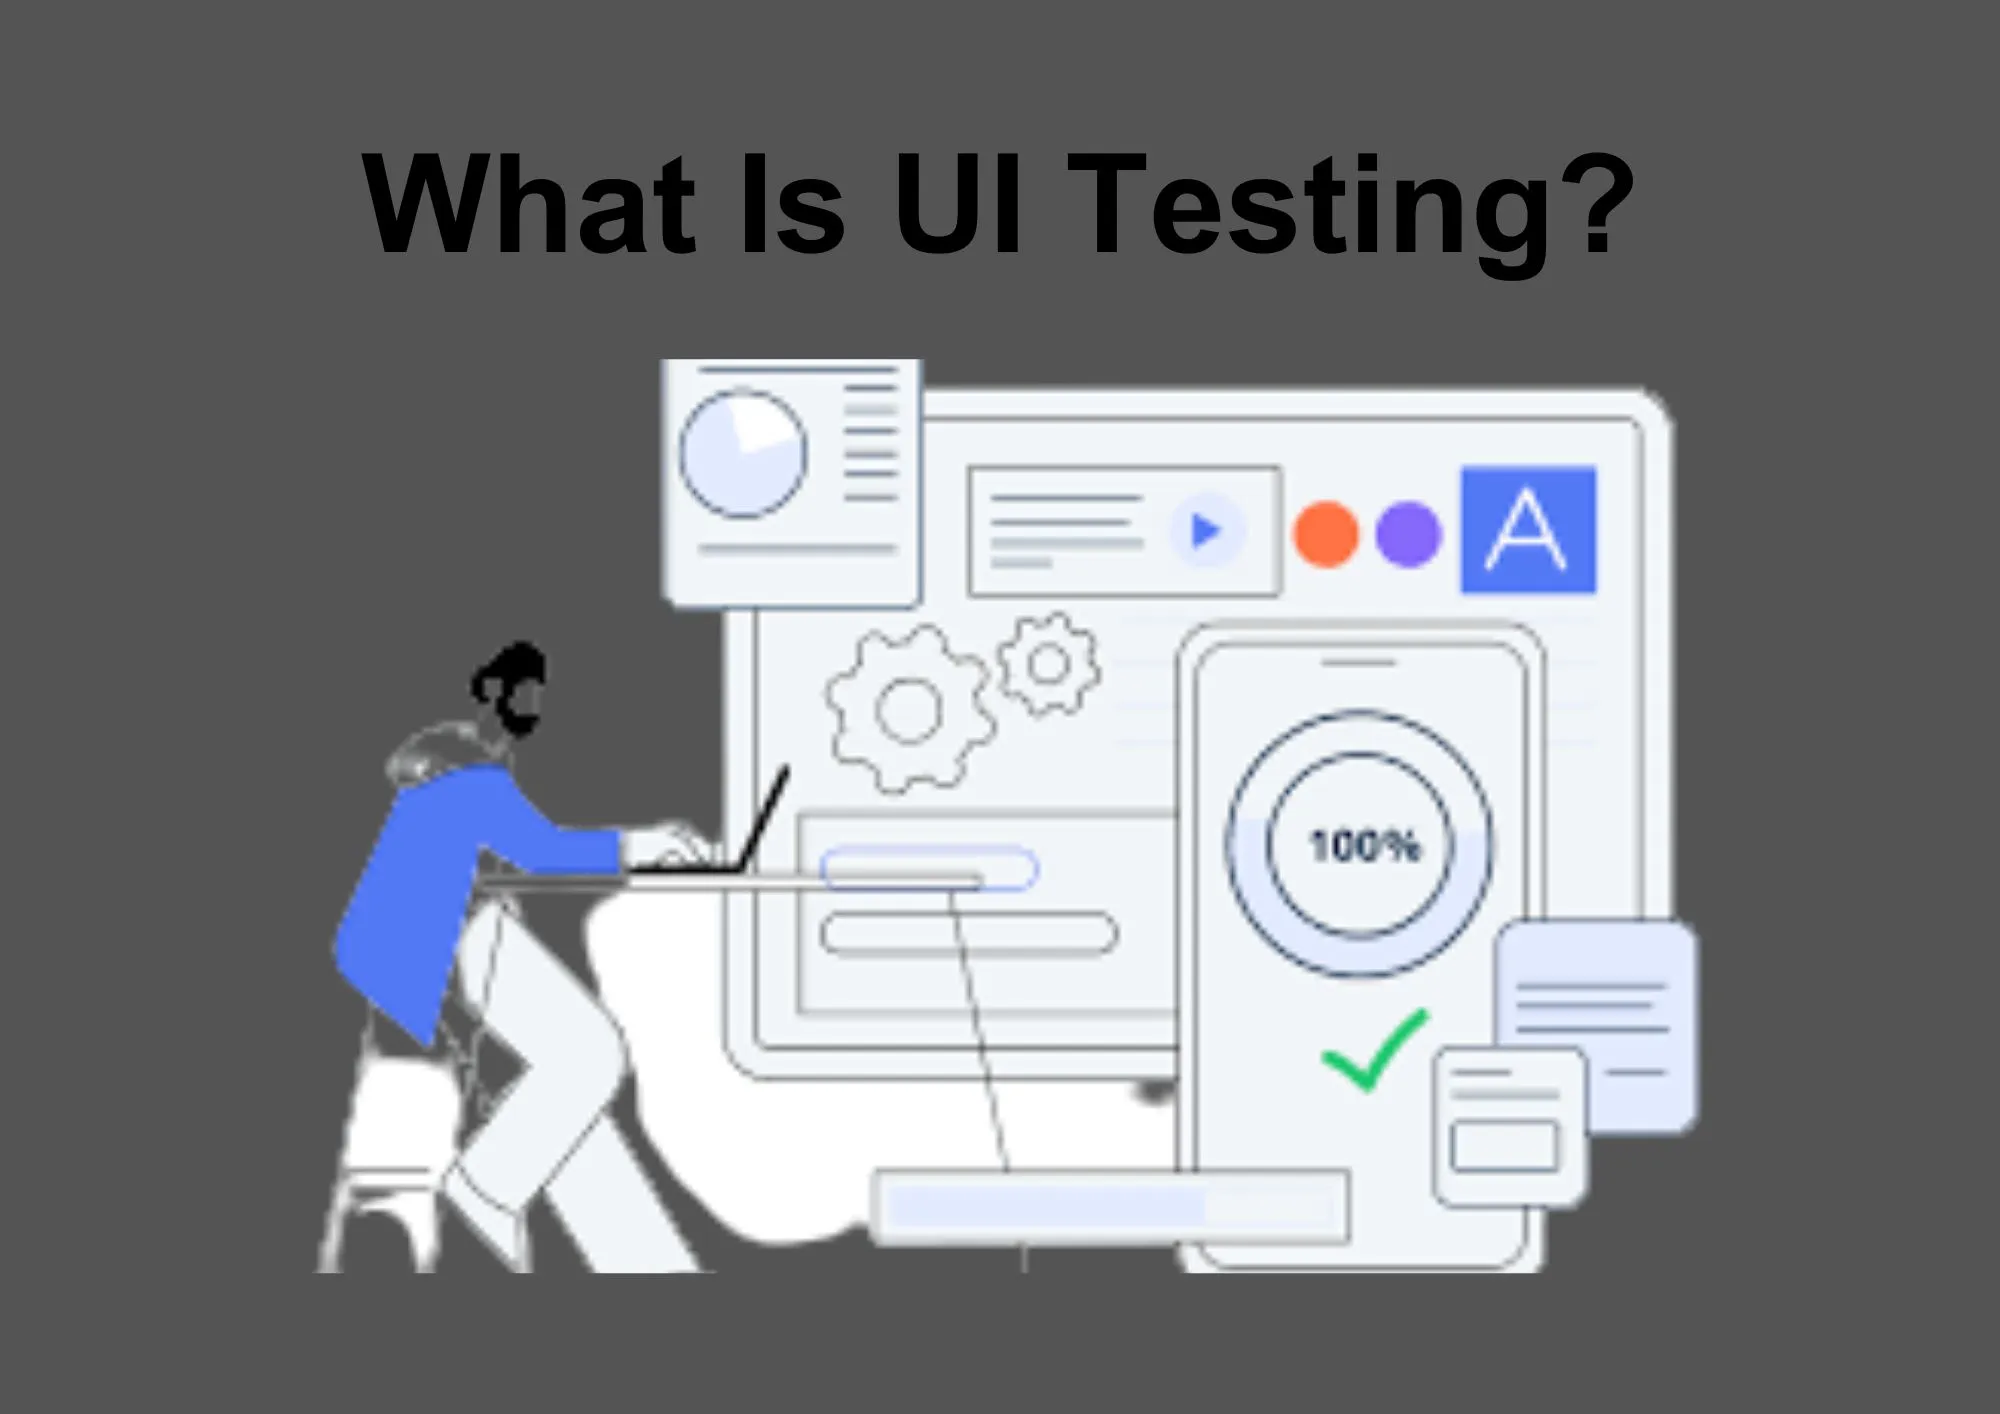 what is UI testing?